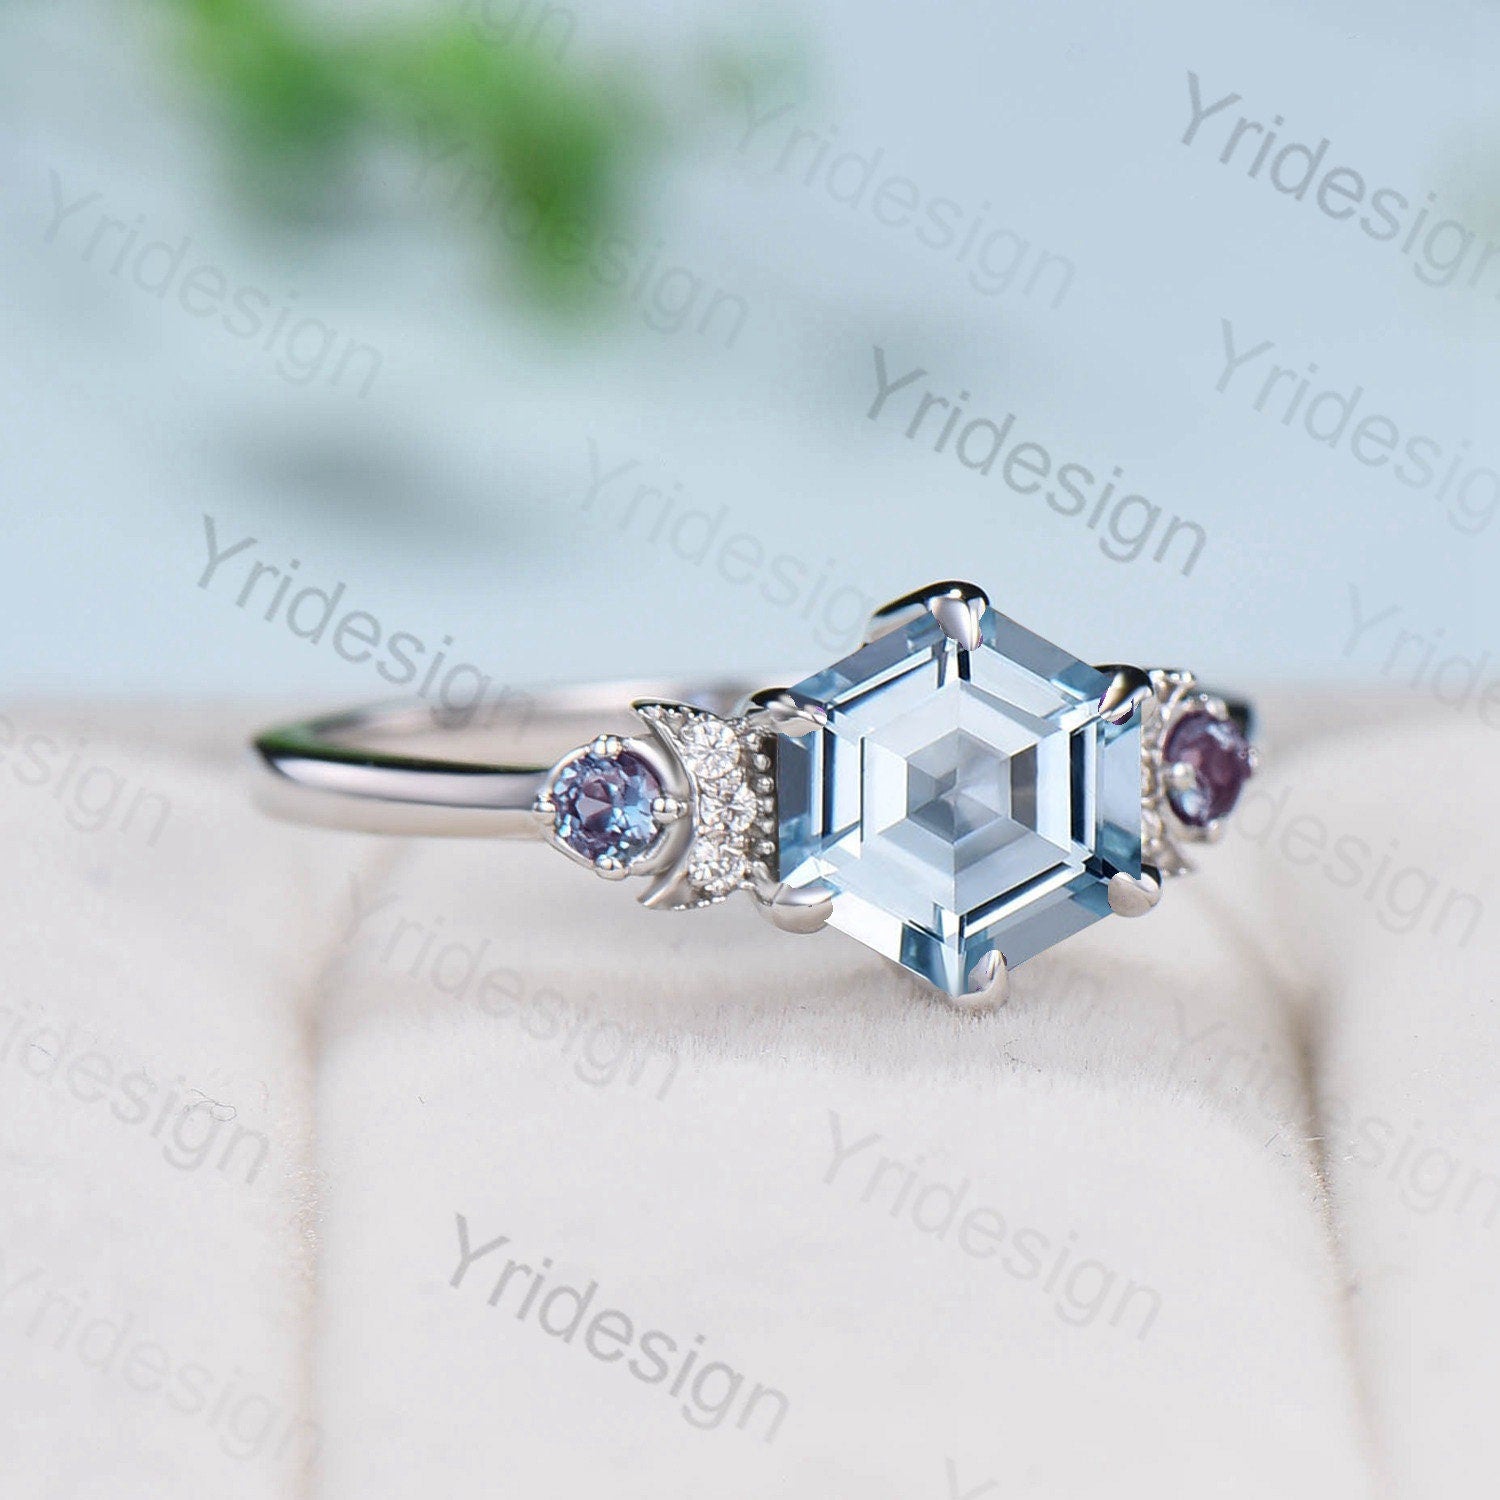 Unique hexagon aquamarine engagement ring Magic celestial moon March birthstone engagement ring vintage crescent wedding ring gift for women - PENFINE